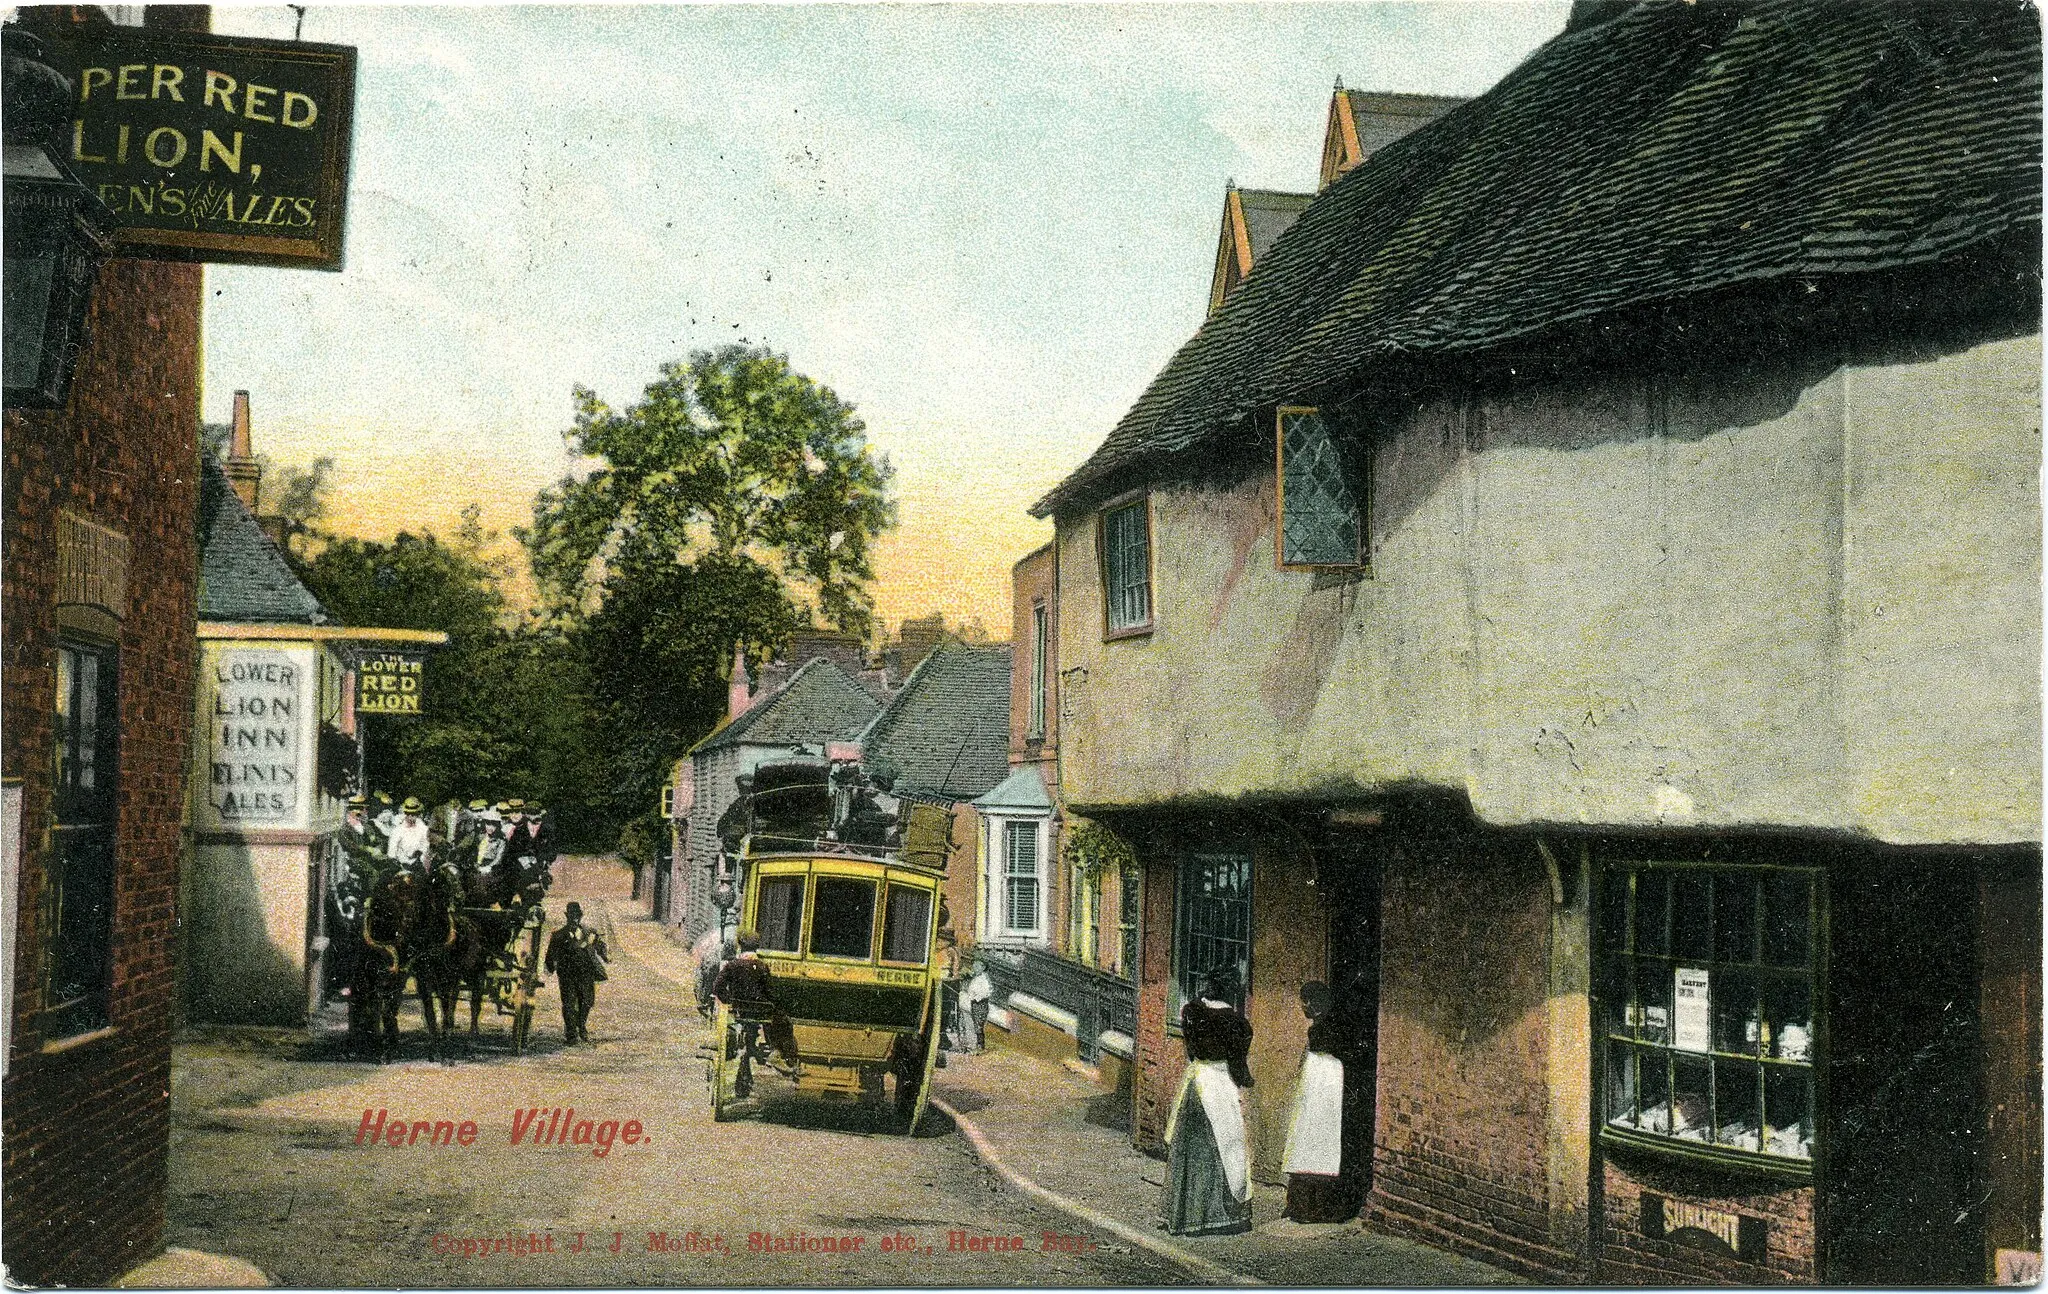 Photo showing: Postcard photo of the Canterbury-Herne Bay road as it passes through Herne, Kent, England. The postcard is postmarked 1905.  On the right is Smugglers Cottage.  The two pubs on the left are called Upper Red Lion and Lower Red Lion.

Points of interest
The group on the charabanc is possibly returning from a Sunday church or works outing to Herne Bay.
The liveried coach could be a mail coach.
The card is published by J.J. Moffat, stationer of Herne. Editing
This is an unedited scan of an historical photograph. If making adjustments to this image, please consider uploading your edit as a separate file.

Contrast
This print has darkened with age, but it would be inappropriate to adjust the brightness because detail would be lost.

Edges
The remaining borderless edges of this image are important for researchers of this type of vintage photograph. Some photographers trimmed their images more than others,and the border or edge is part of the artwork. Researchers need to see exactly where the edge of the postcard is. Thank you for taking the time to read this.